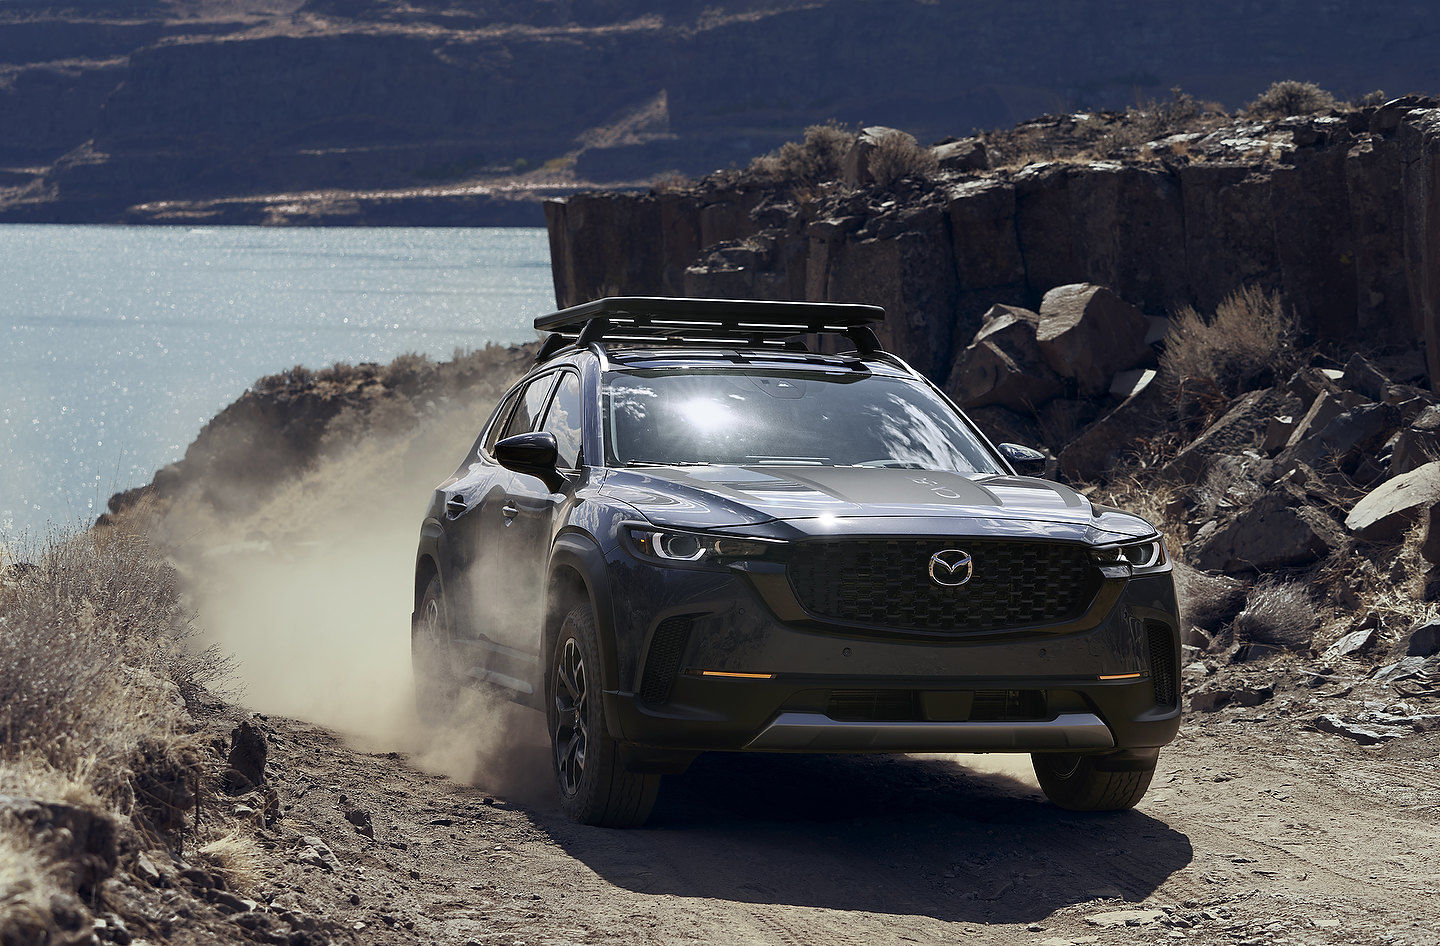 Here is the all-new 2023 Mazda CX-50